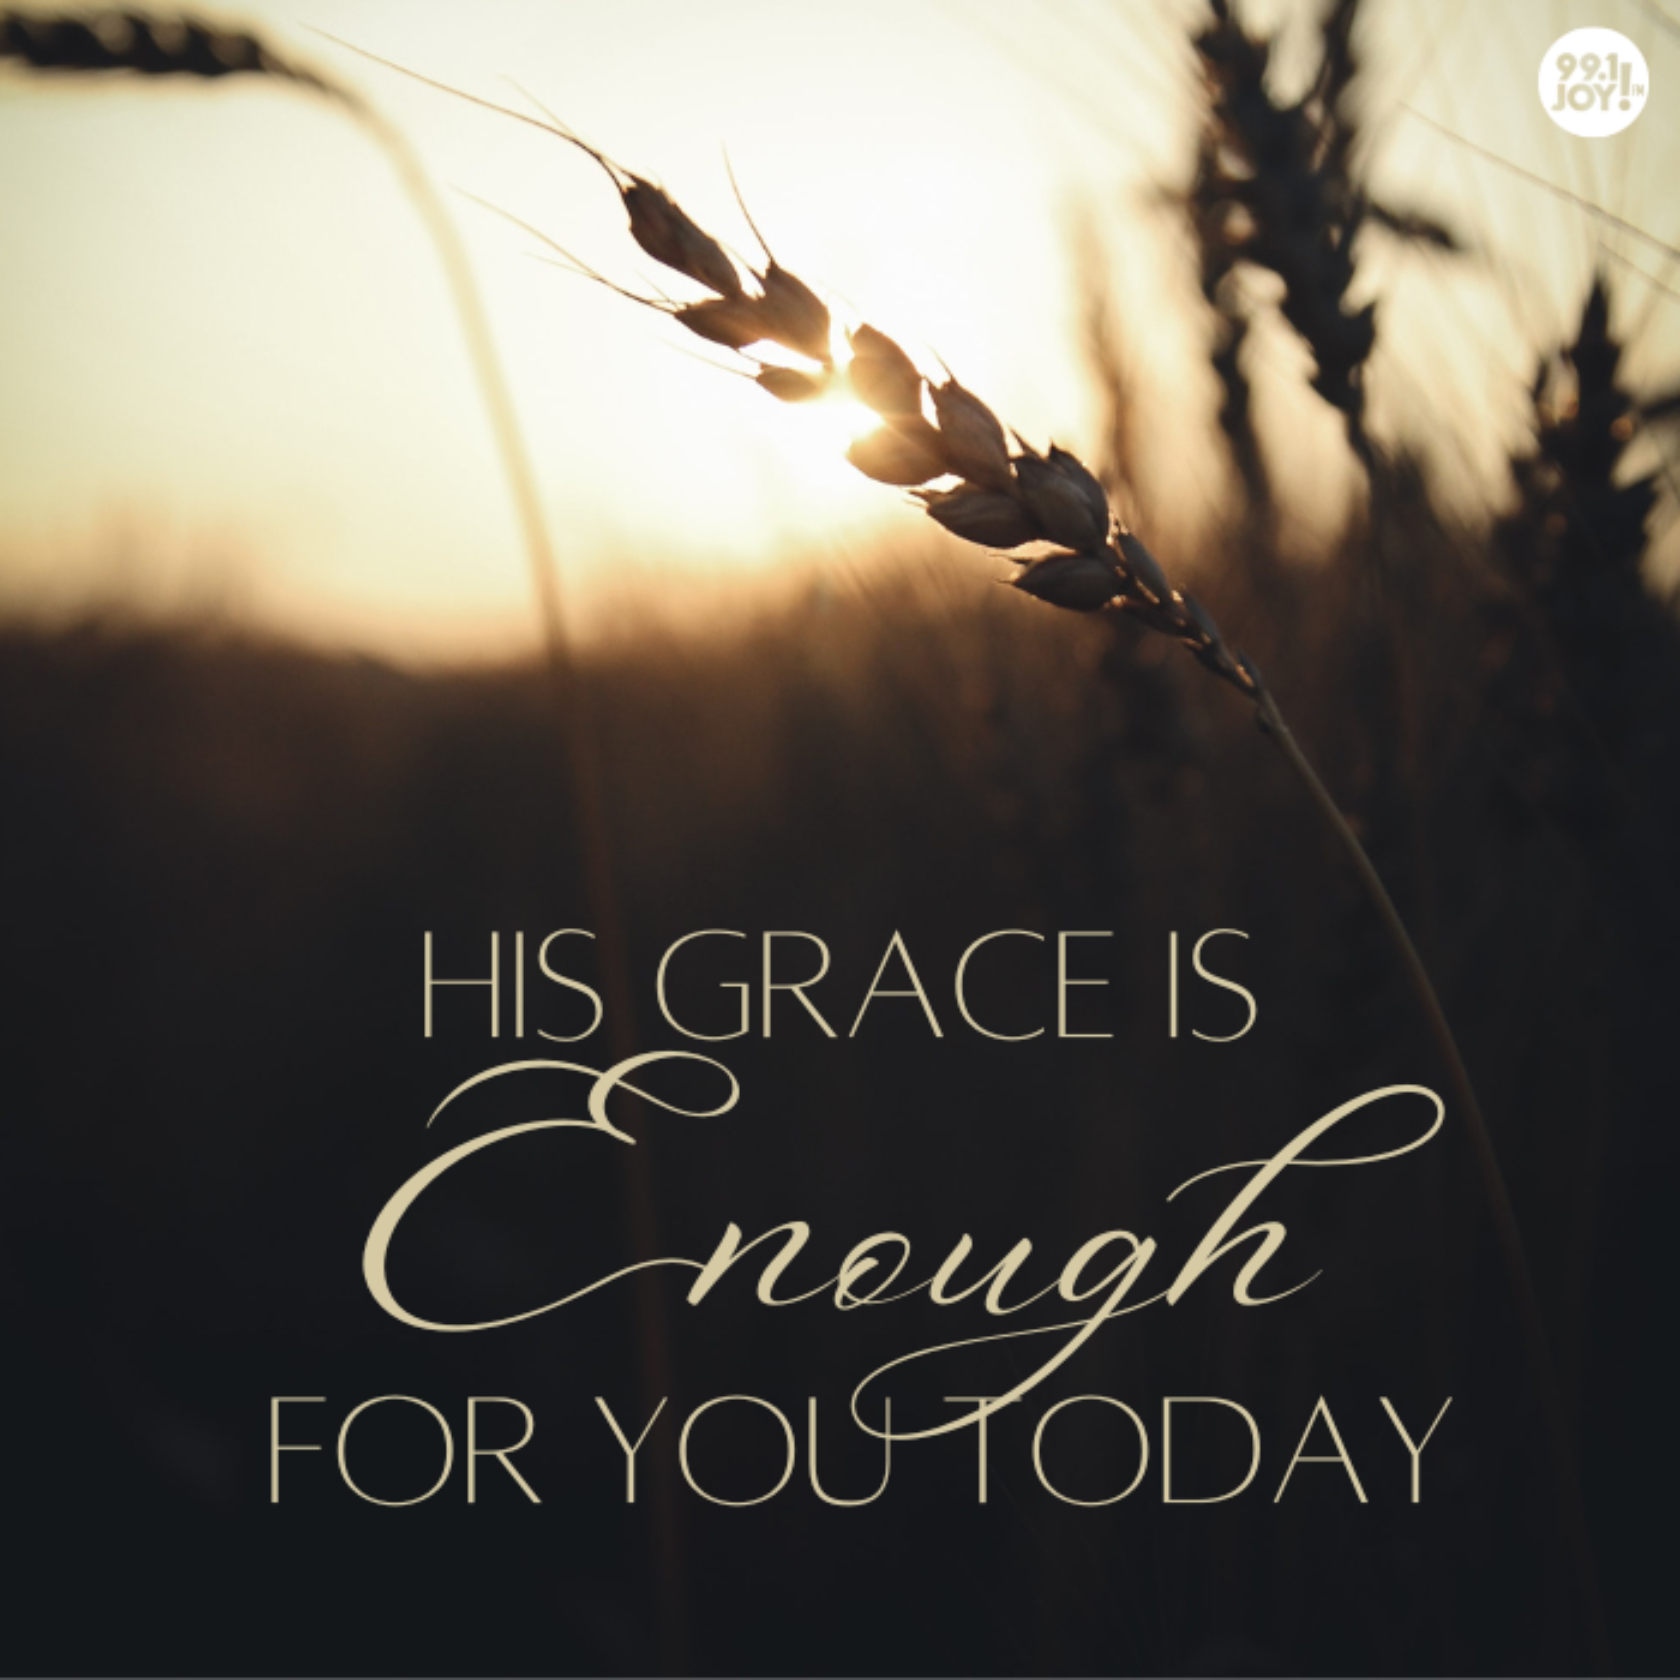 His Grace Is Enough For You Today